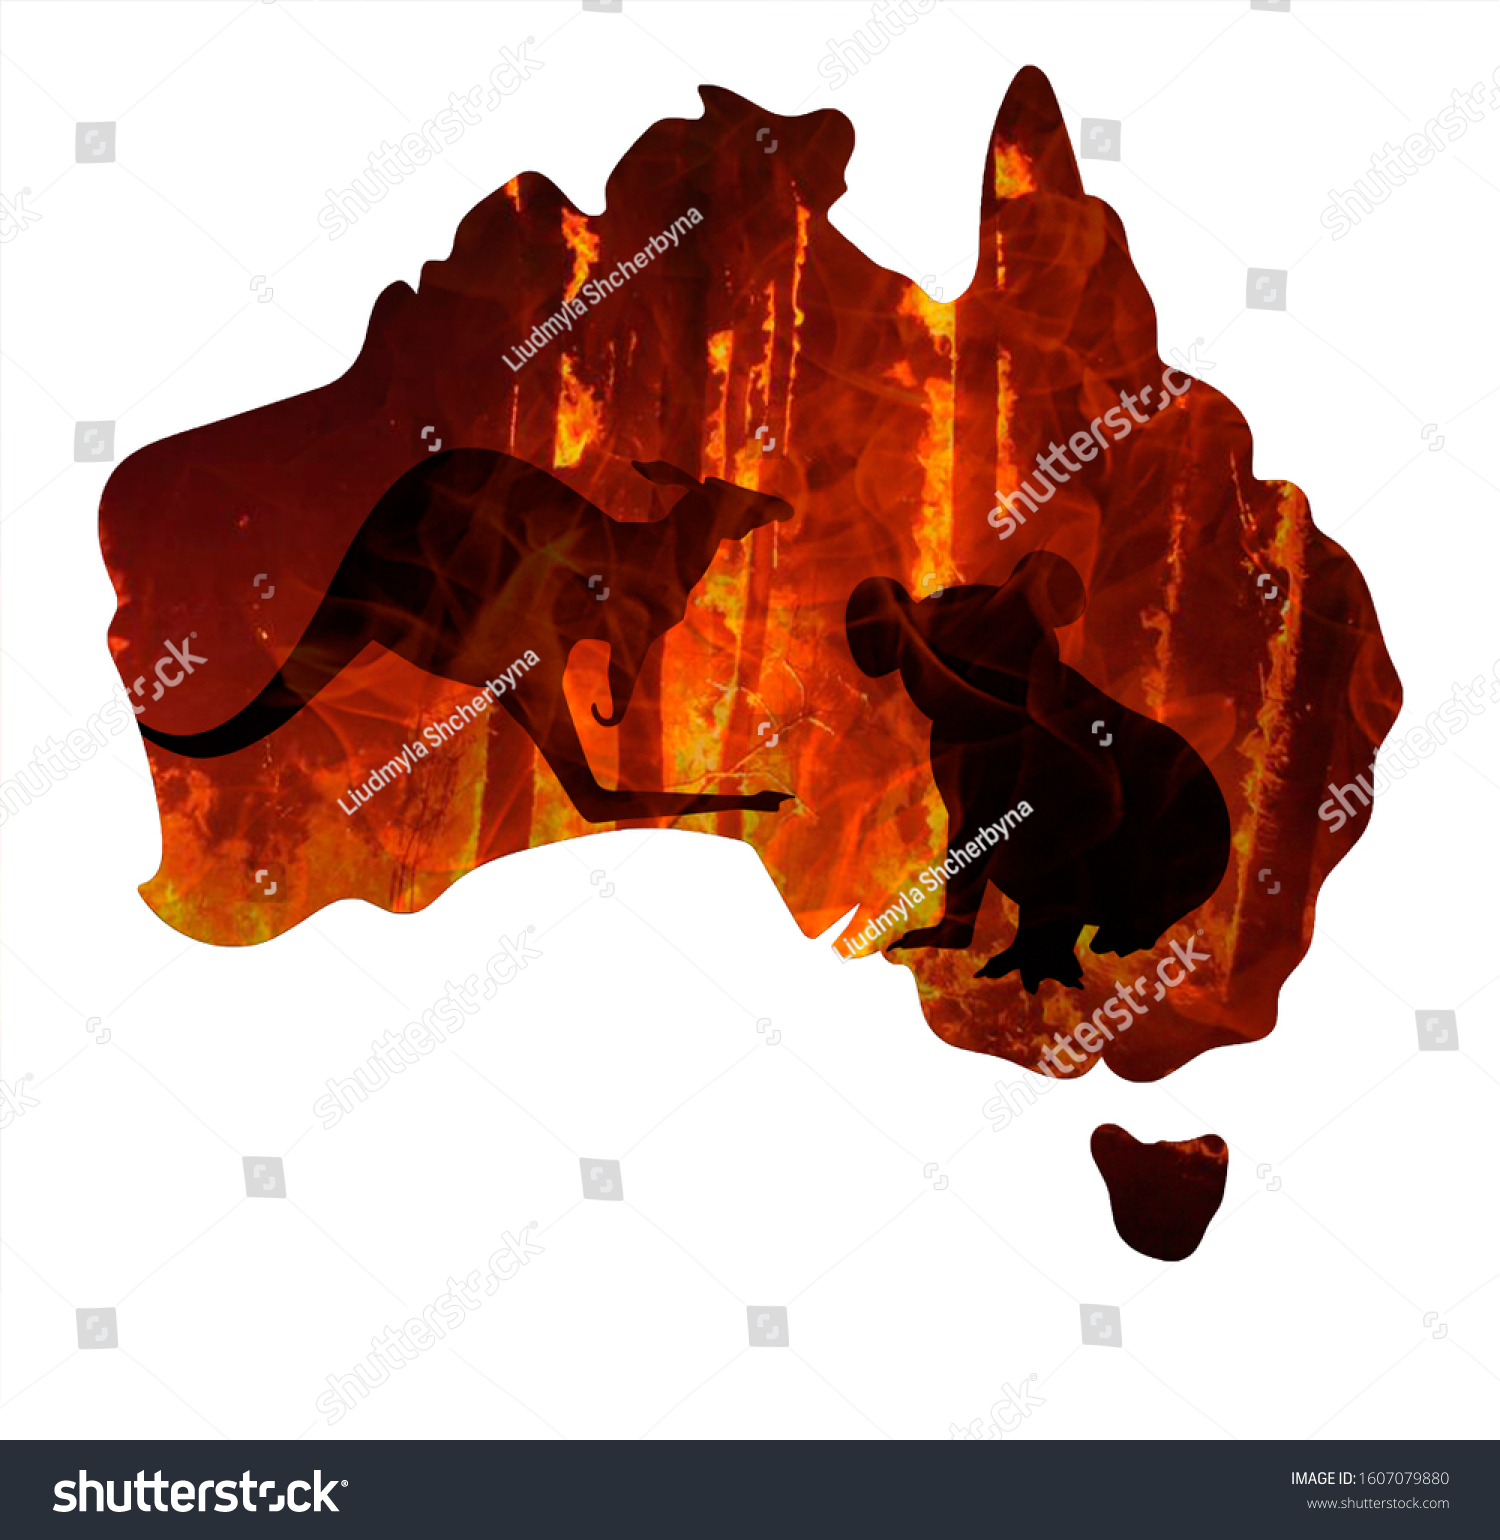 Fire in Australia. Animals killed in Fiers. Catastrophe and apocalypse. Pray for Australia #1607079880